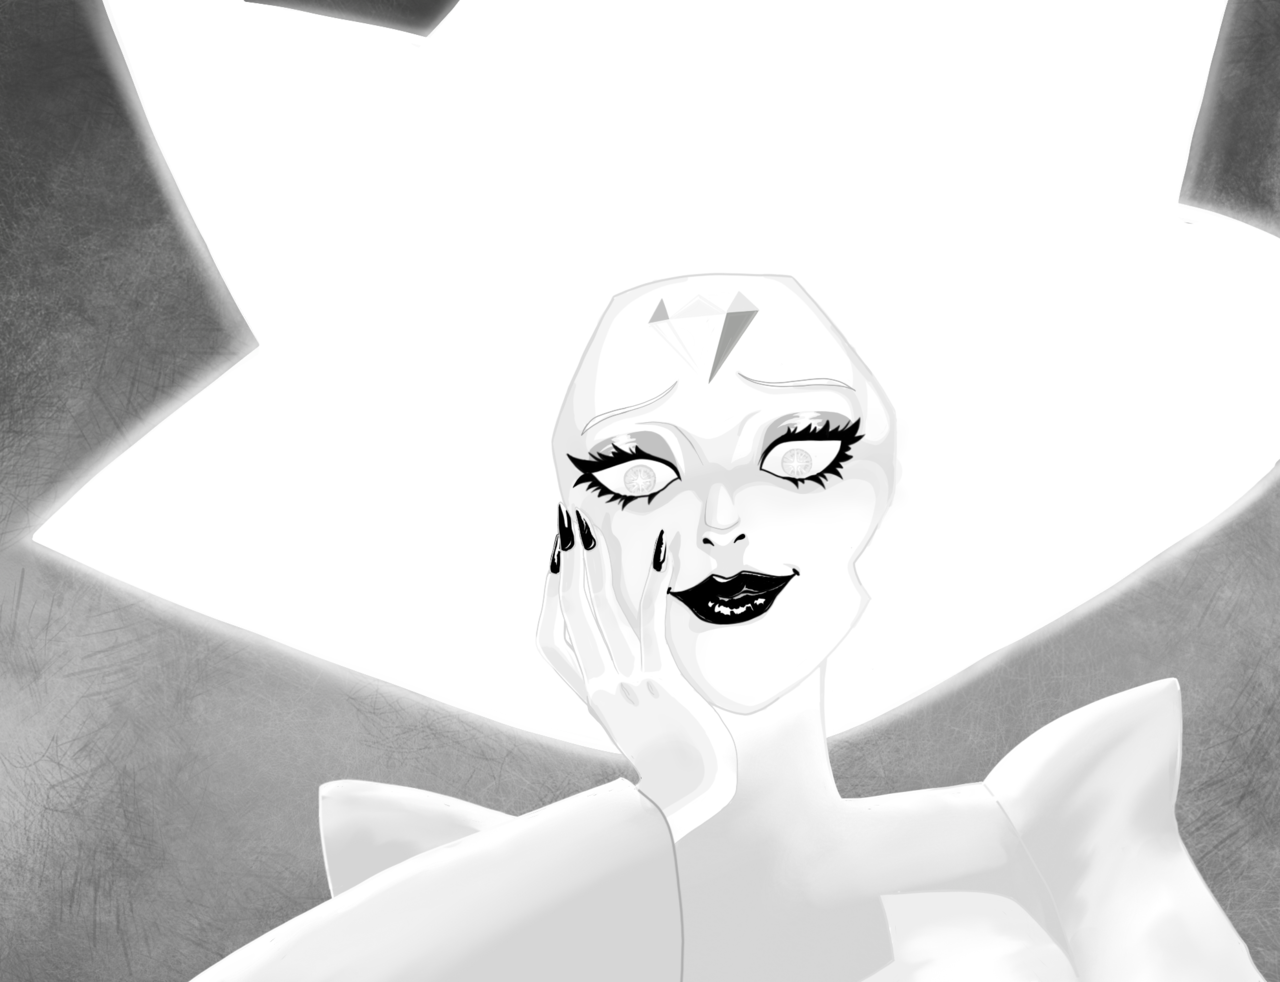 White Diamond Redraw I finally got around to finishing up since some ice and snow got a lot of my classes canceled today.